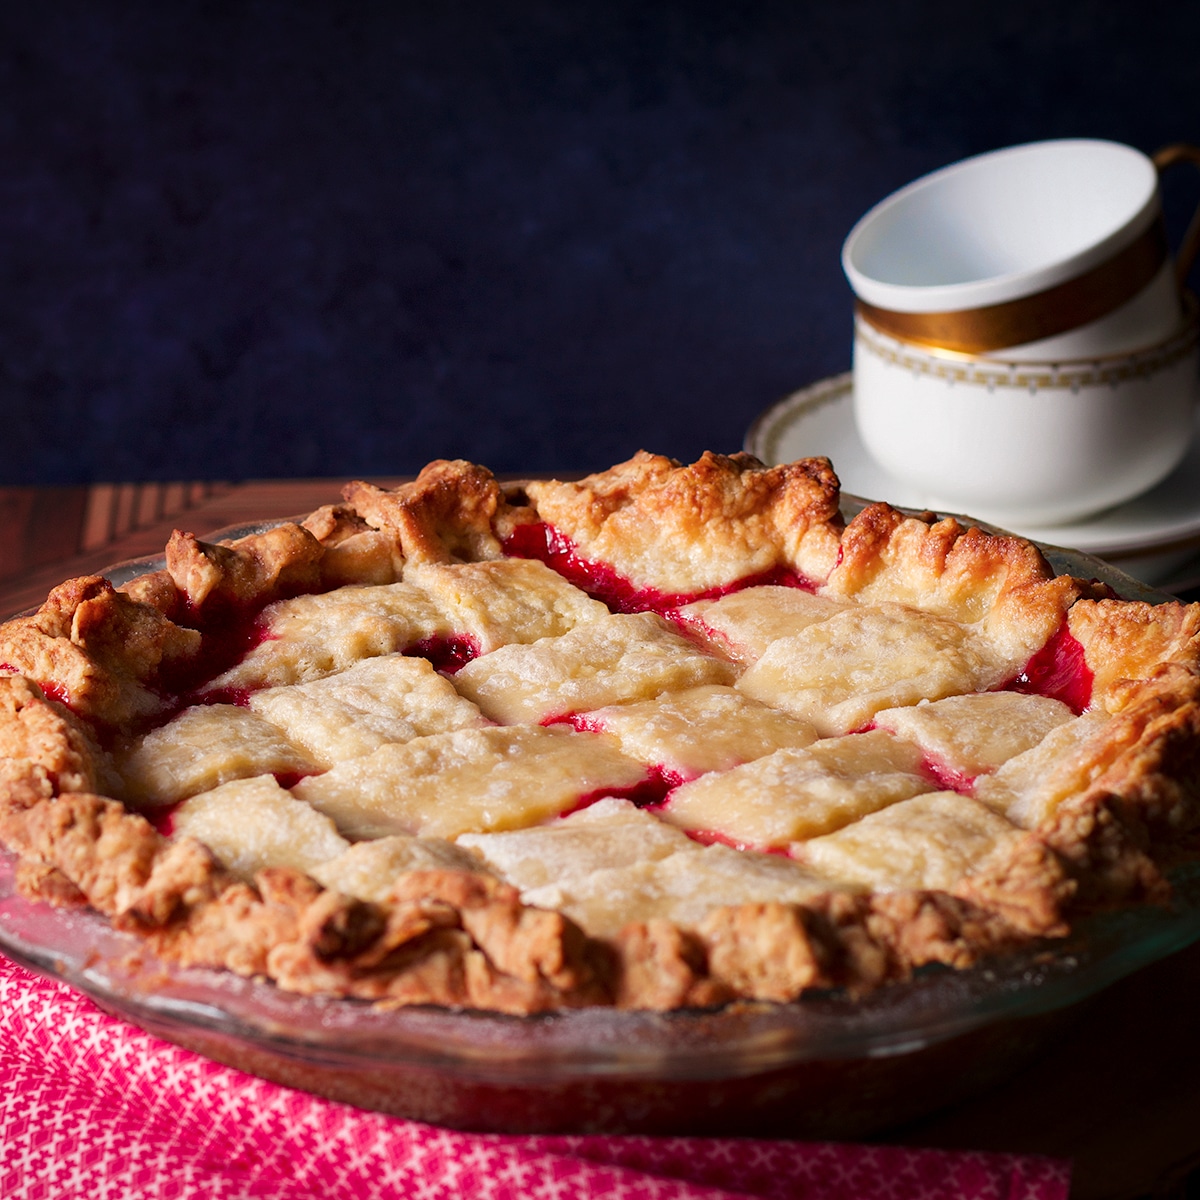 A freshly baked raspberry pie cooling on a table.